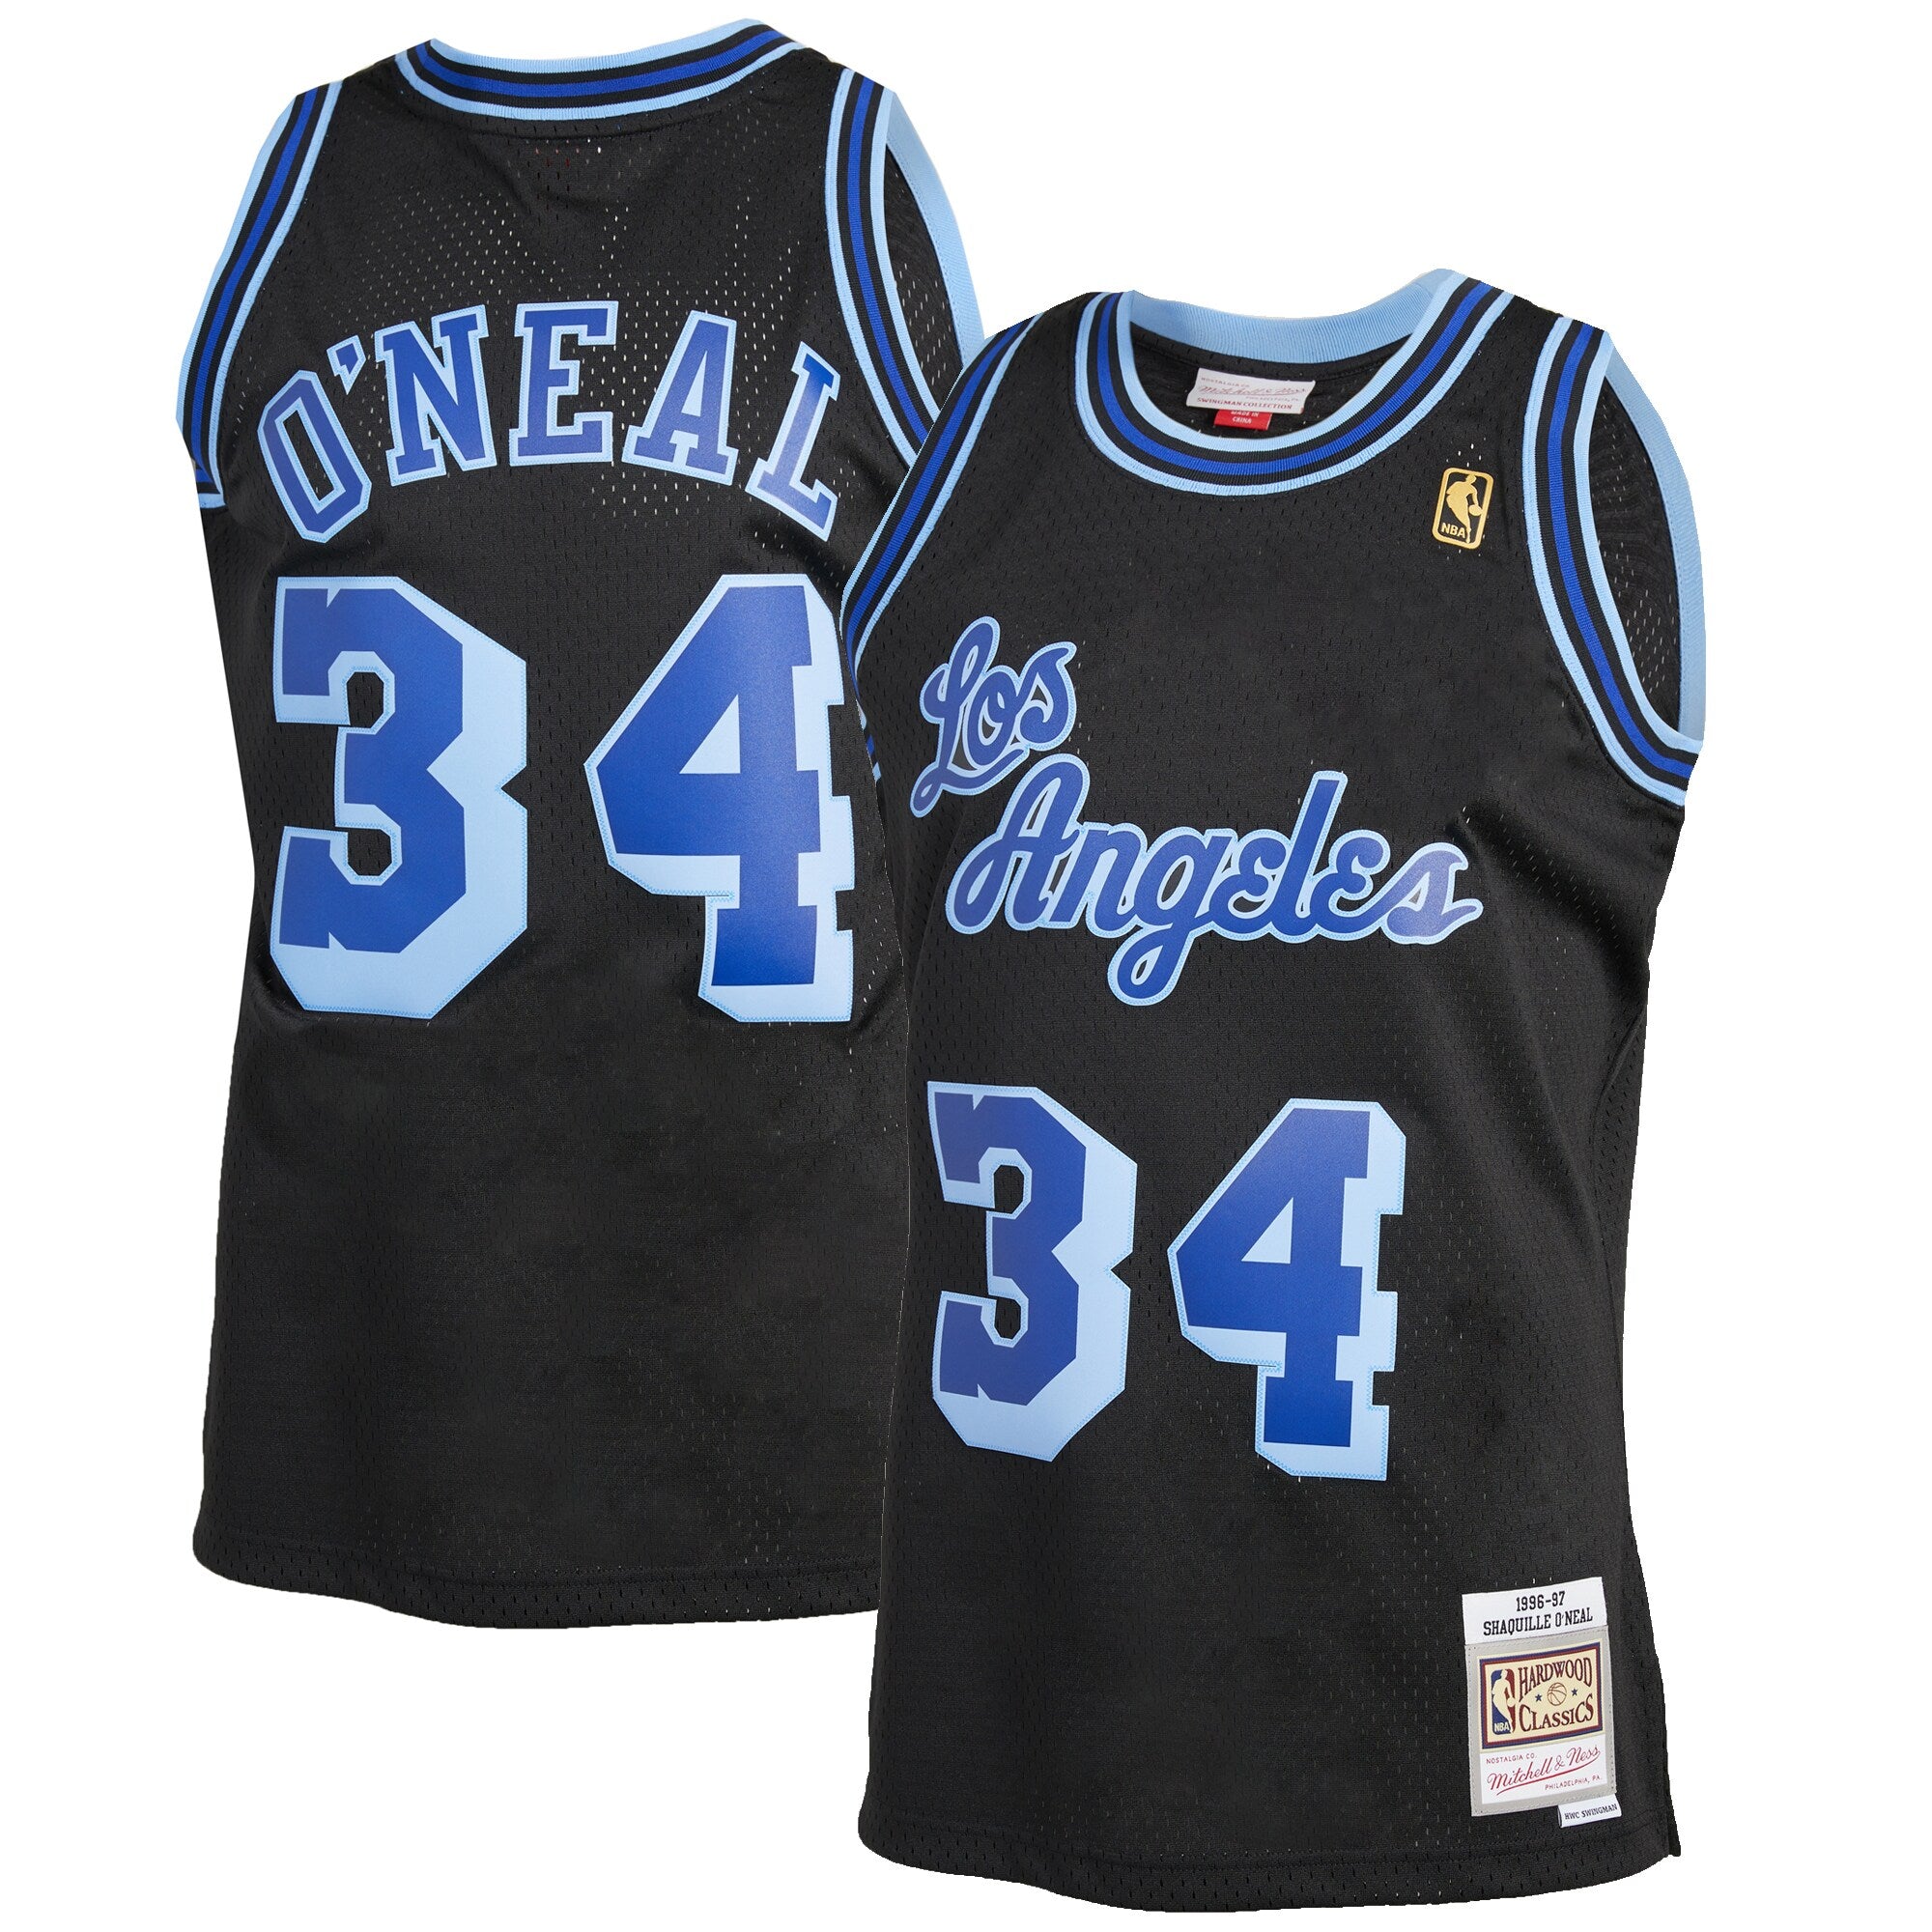 Mitchell & Ness Men's Shaquille O'Neal Navy Cleveland Cavaliers